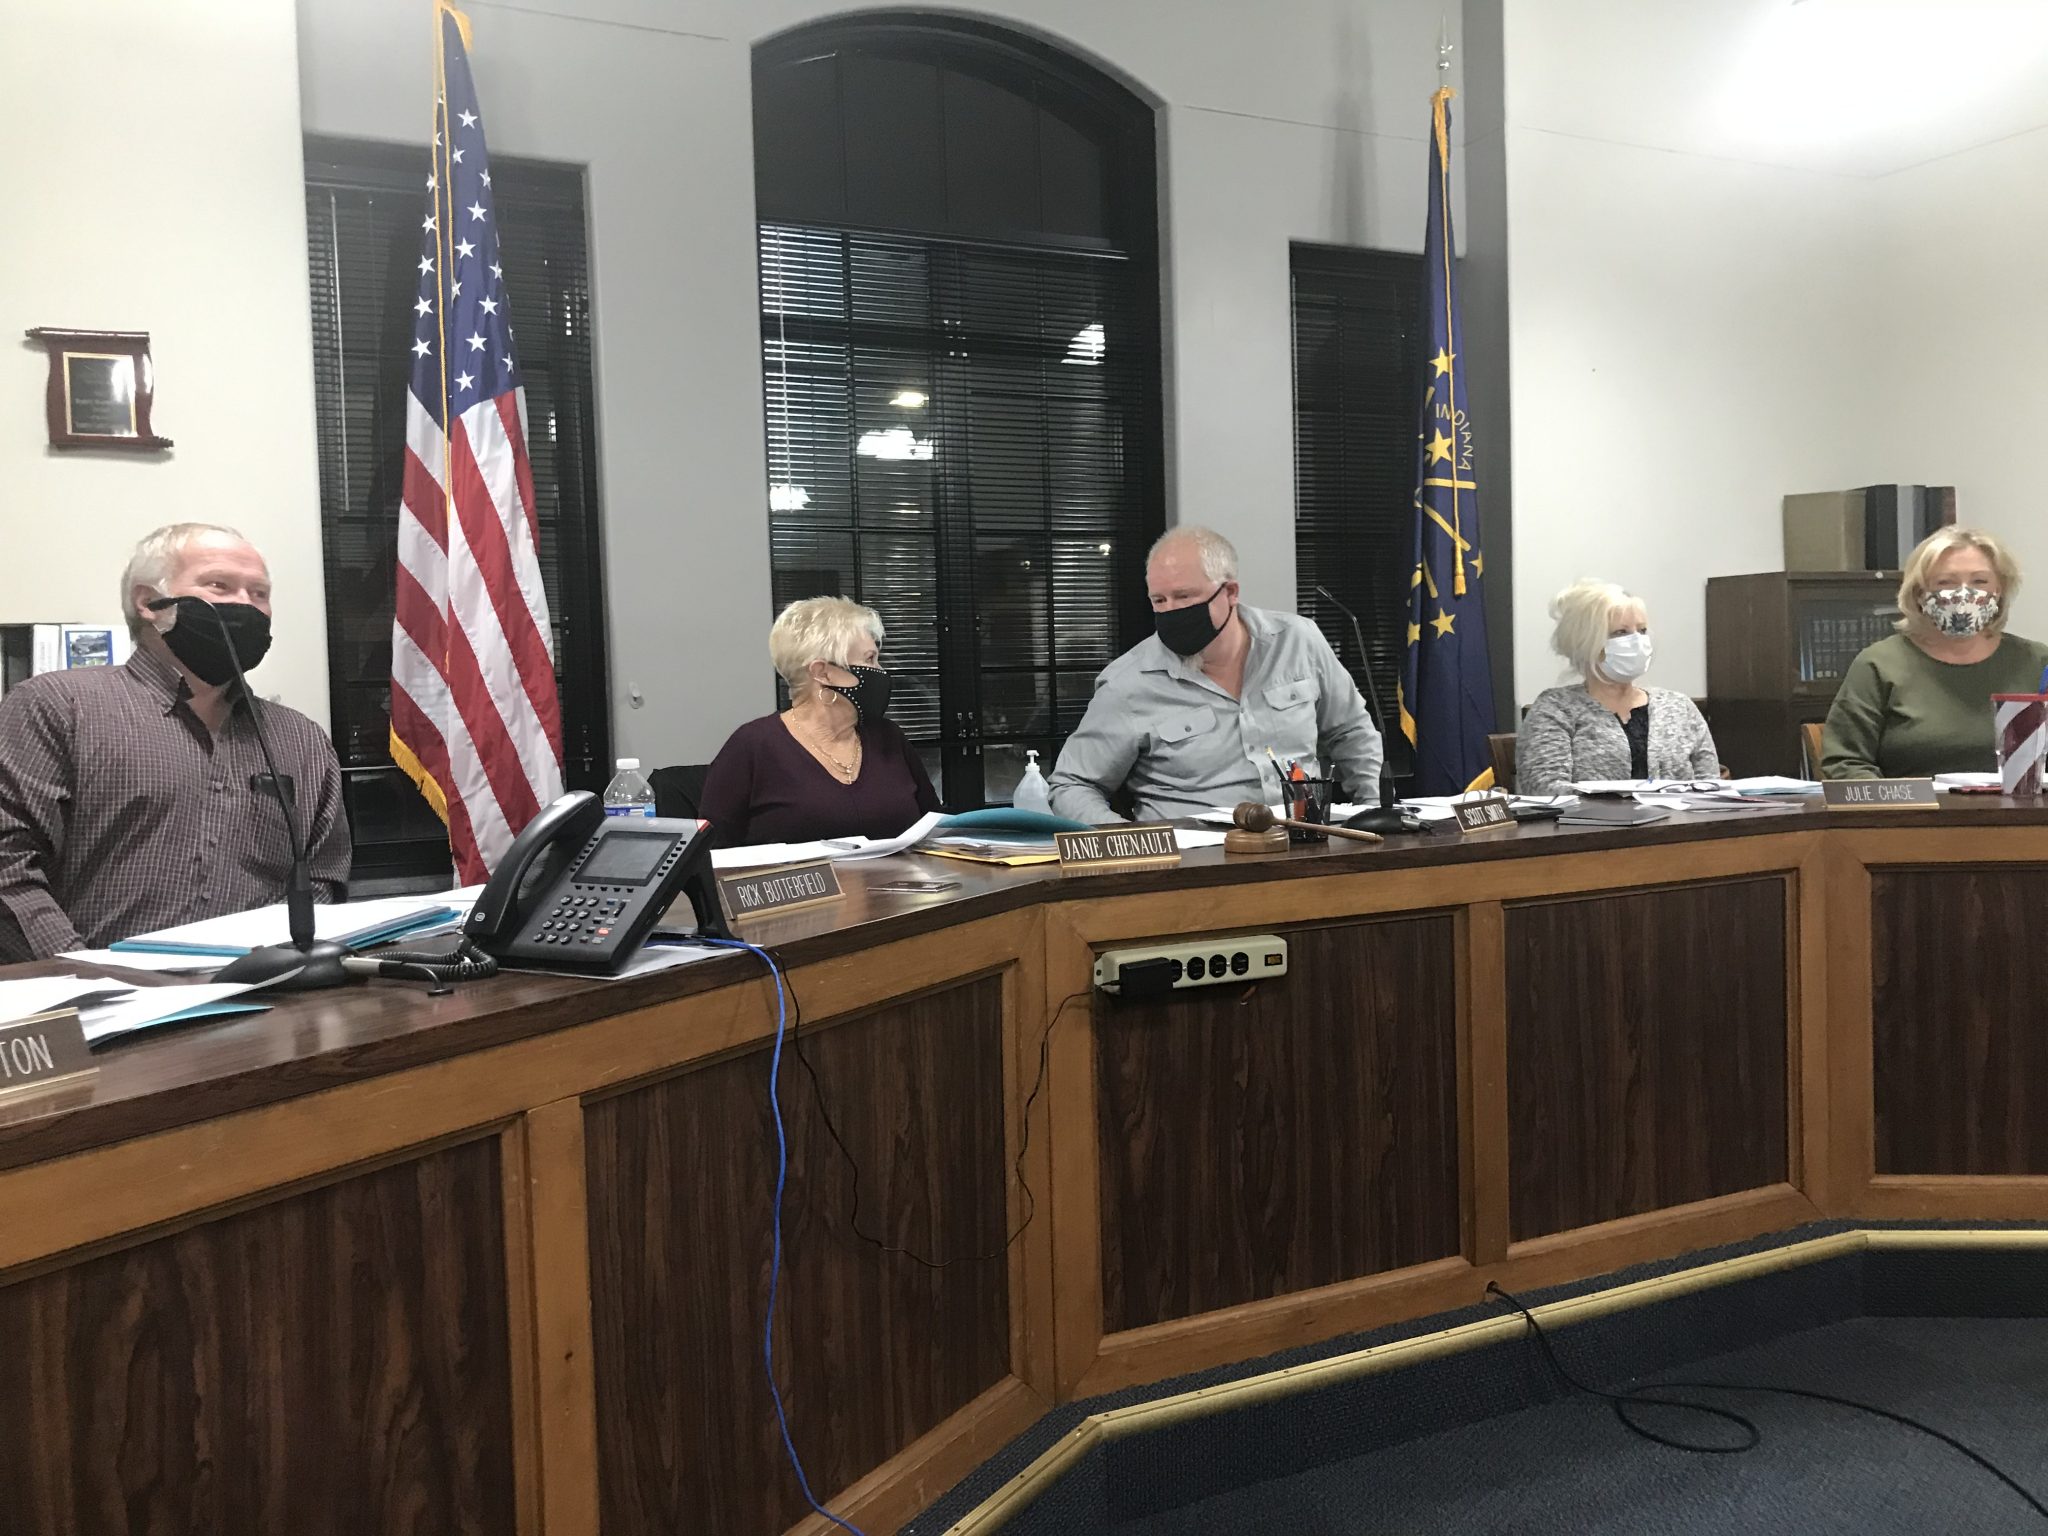 Lawrence County Council Members Vote To Attain Legal Counsel Following